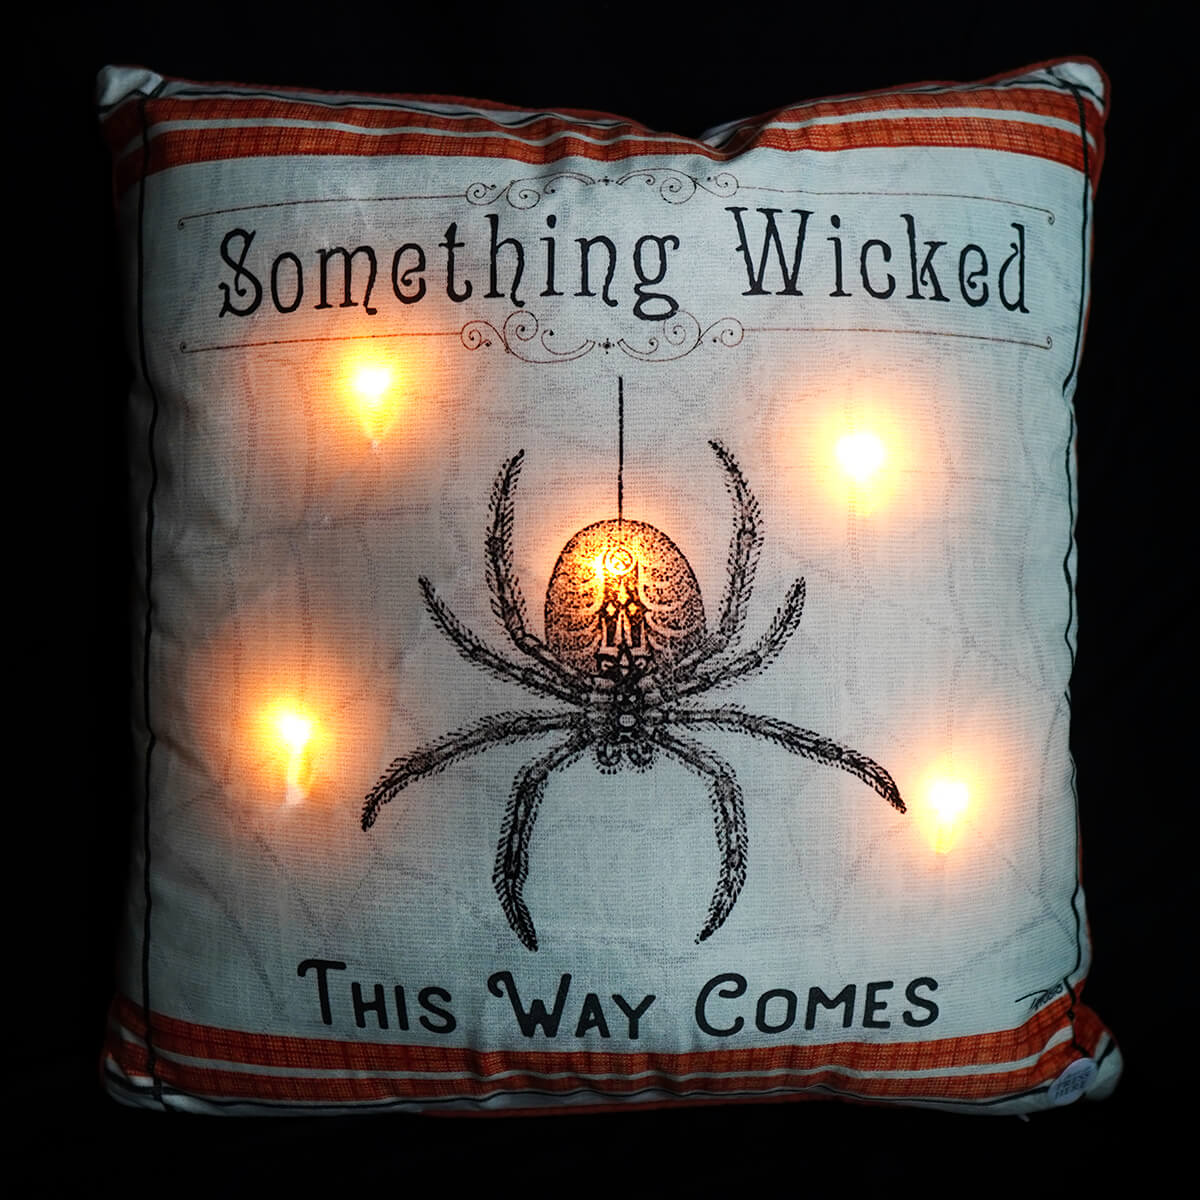 Wicked Spider LED Pillow